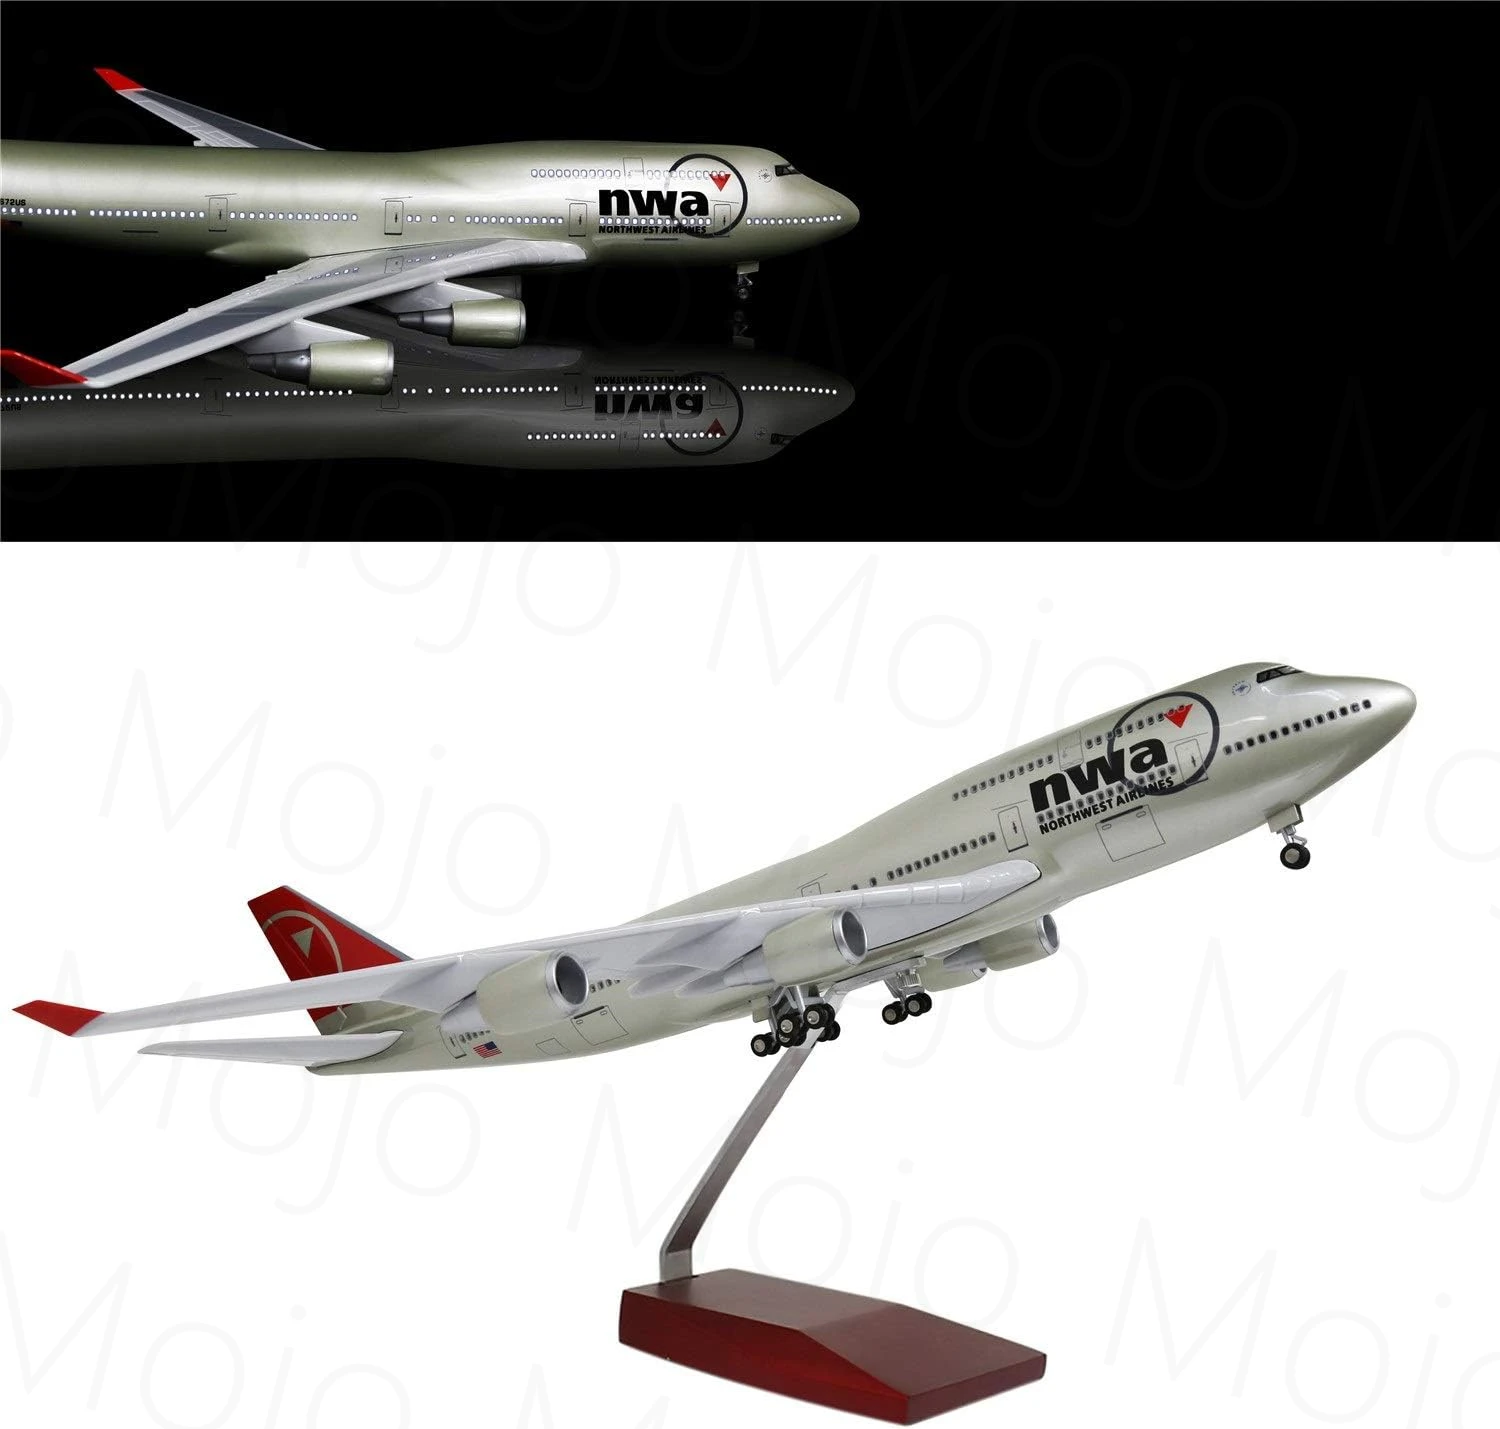 

1:150 Scale 47cm 747 Model Airplane Northwest Boeing B747 Plane Models Diecast Airplanes with LED Light for Collection or Gift